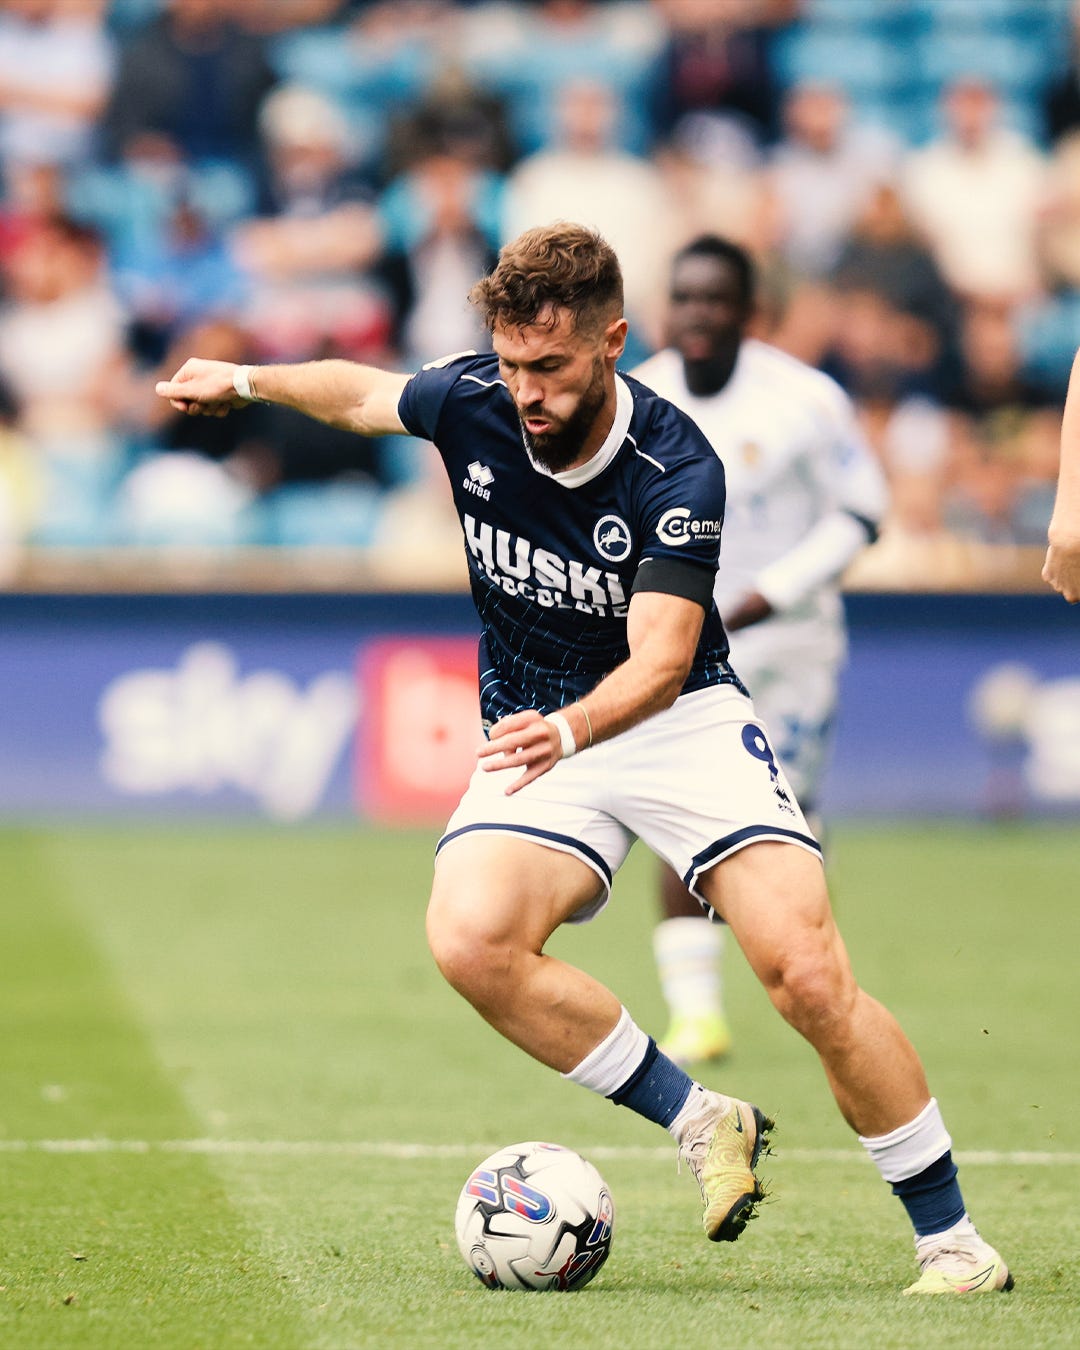 Piroe´s double helps Leeds cruise past Millwall 